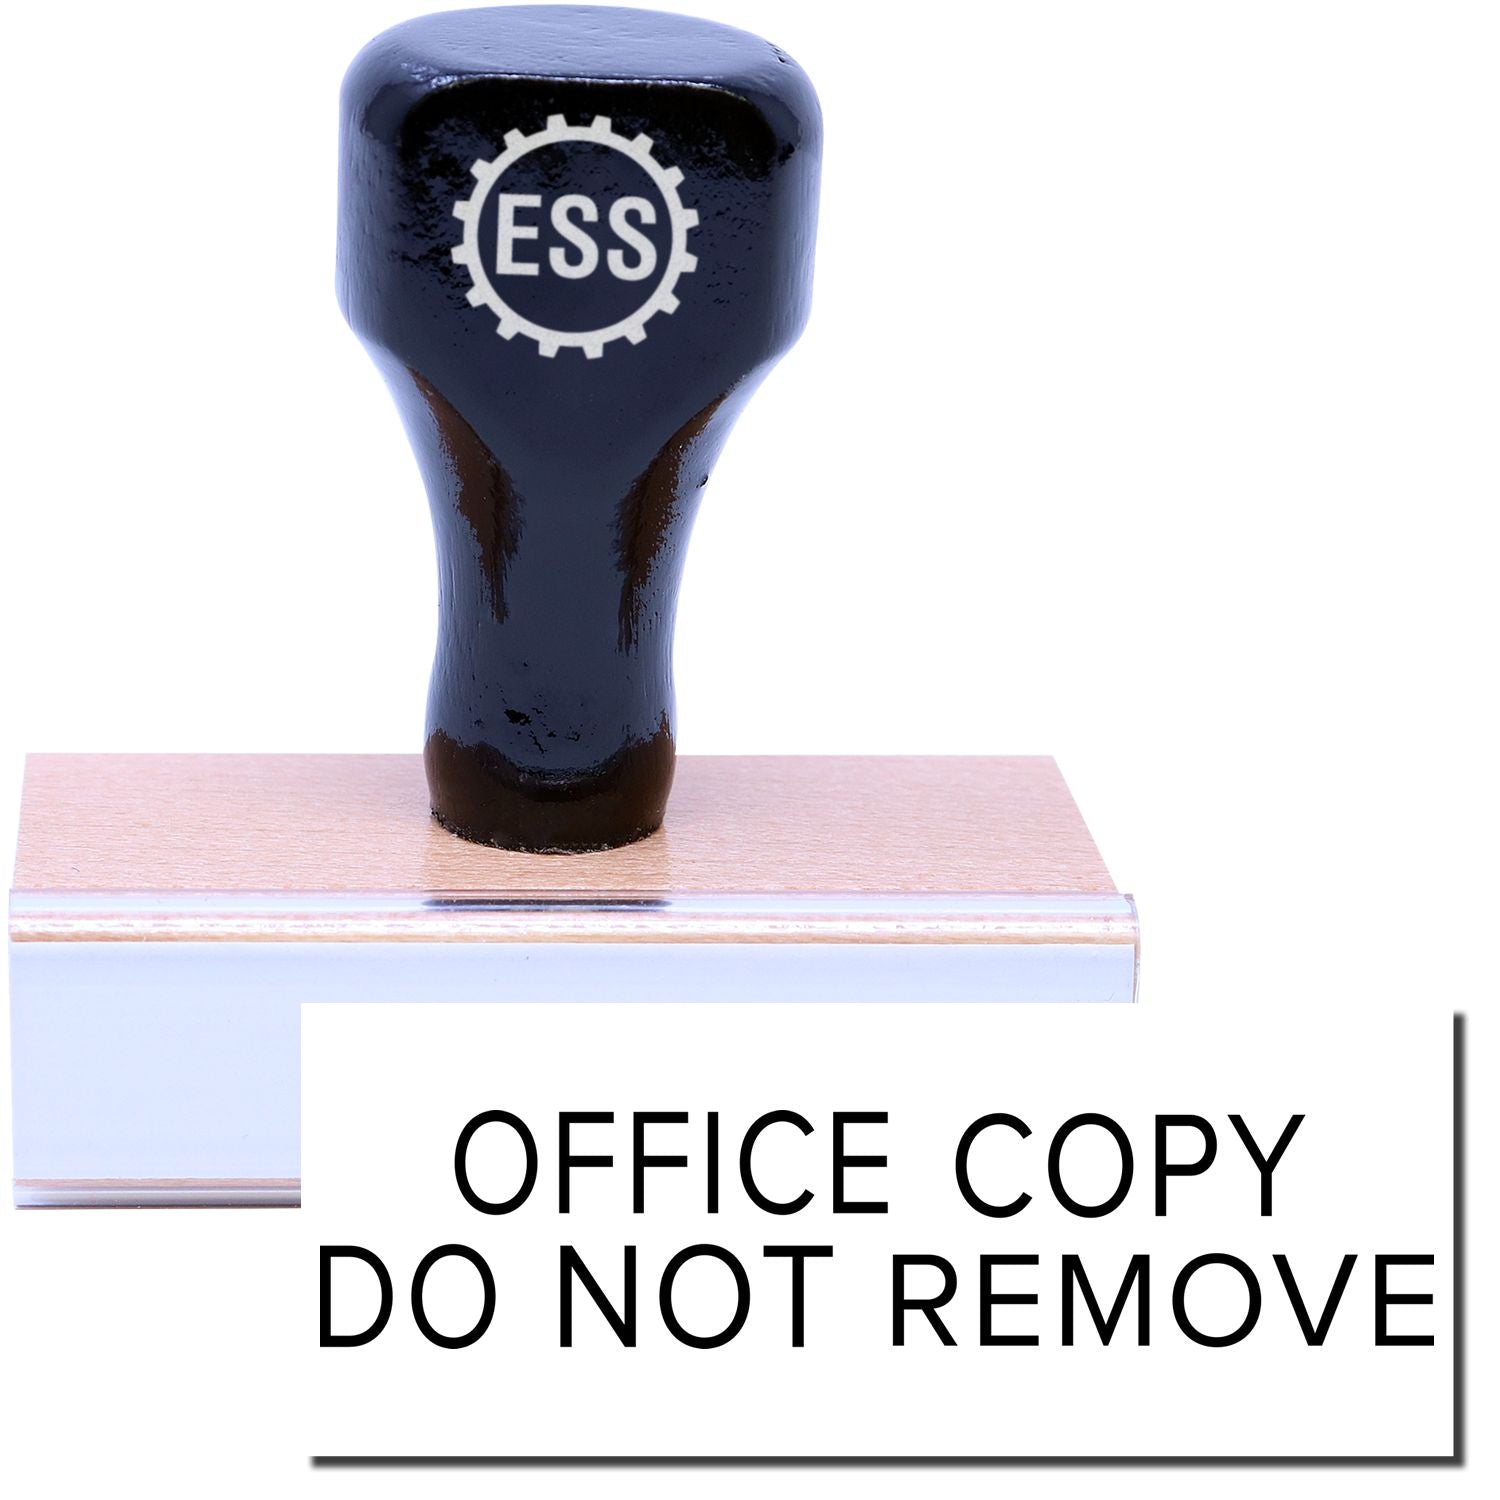 A stock office rubber stamp with a stamped image showing how the text "OFFICE COPY DO NOT REMOVE" in a narrow font is displayed after stamping.